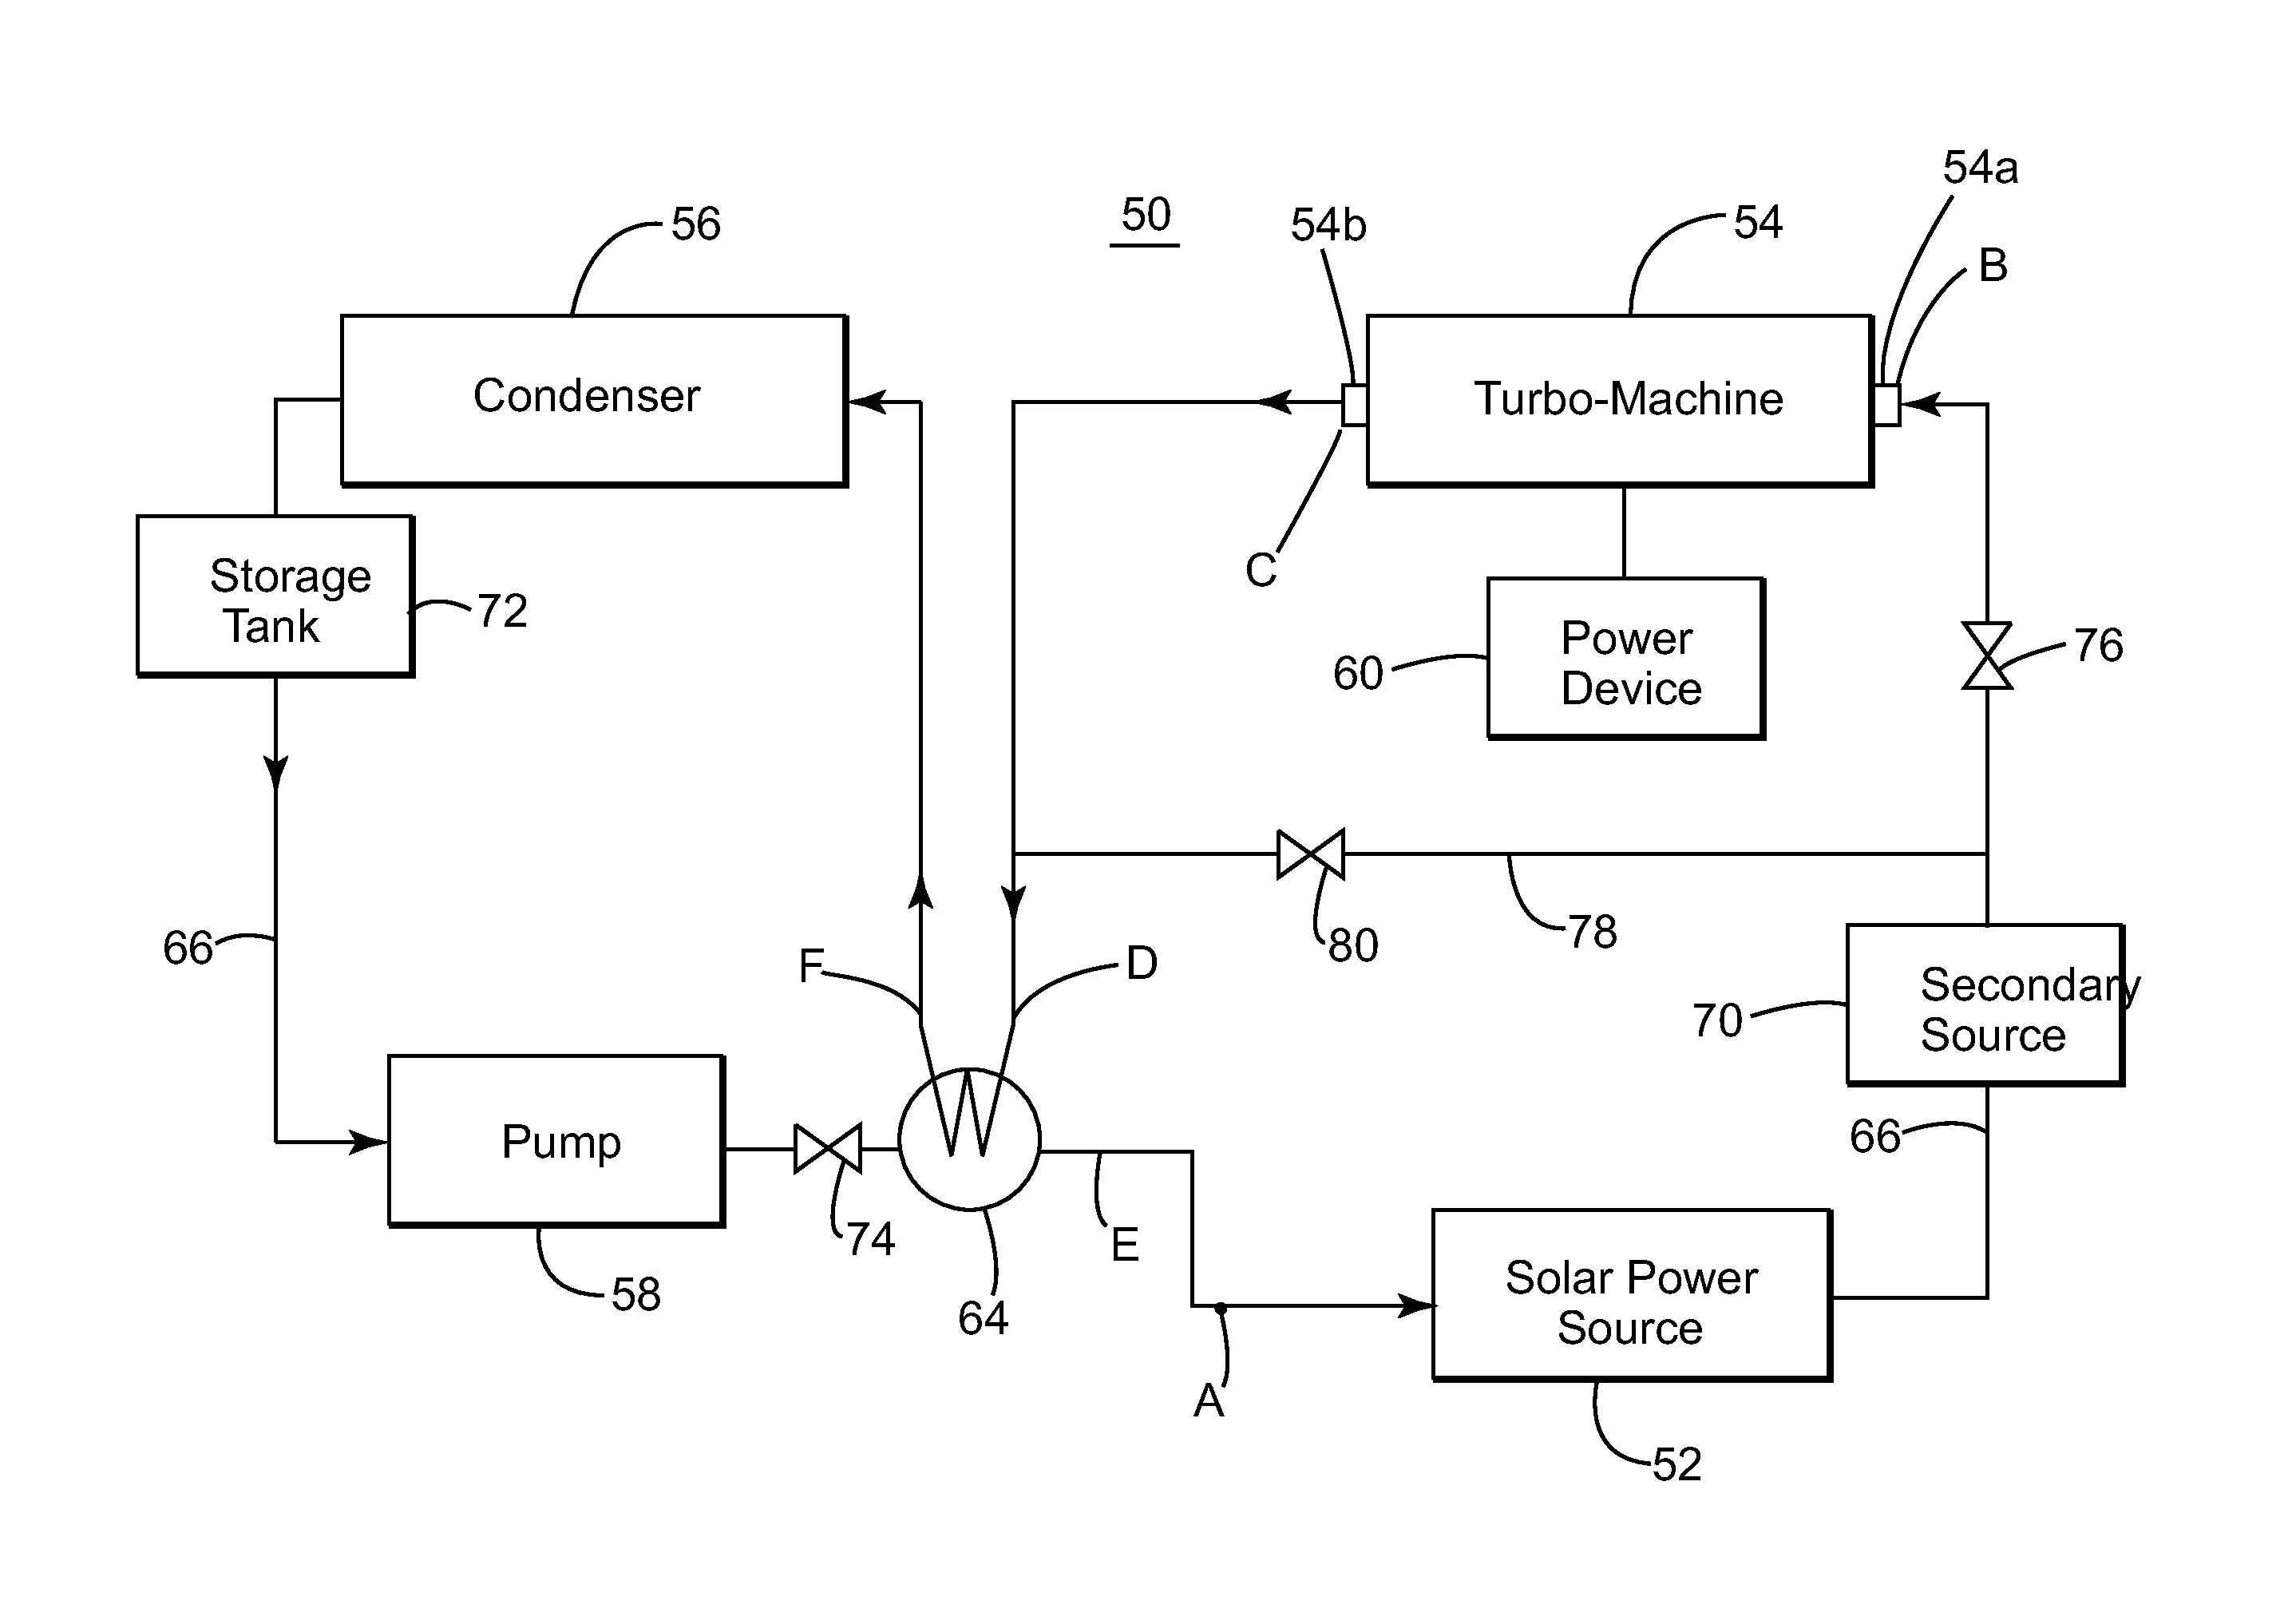 Organic rankine cycle for concentrated solar power system